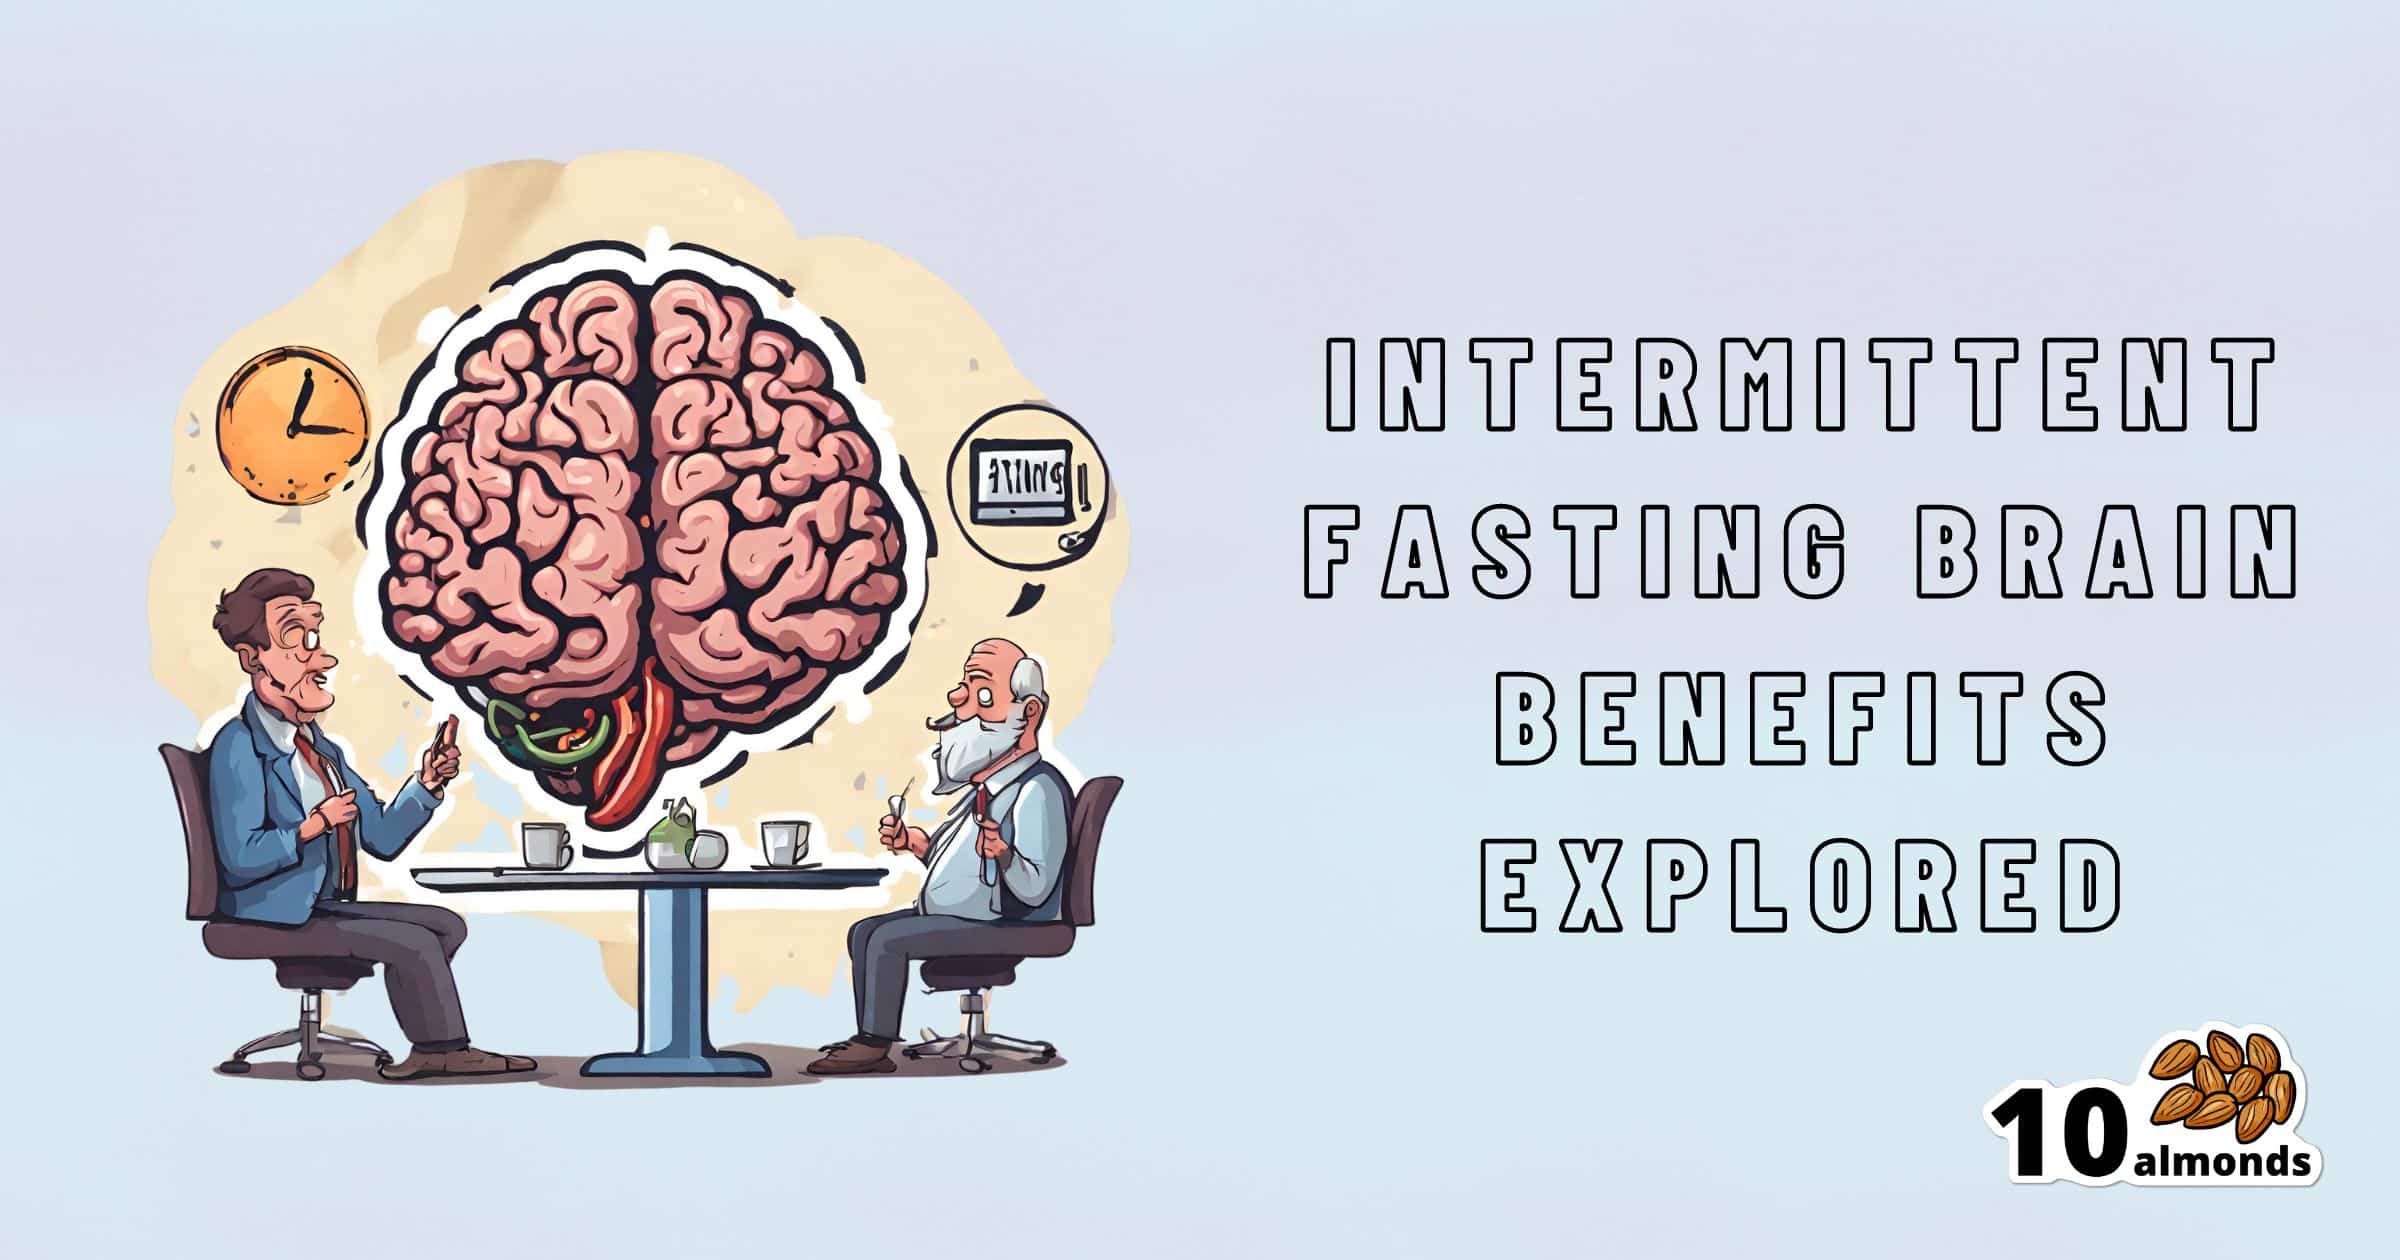 A digital illustration shows two people sitting at a table, each with a plate of food, and a large brain above them. A thought bubble over the right person's head reads "Fasting." The text on the right reads "Intermittent fasting brain benefits explored" beside the 10 almonds logo.